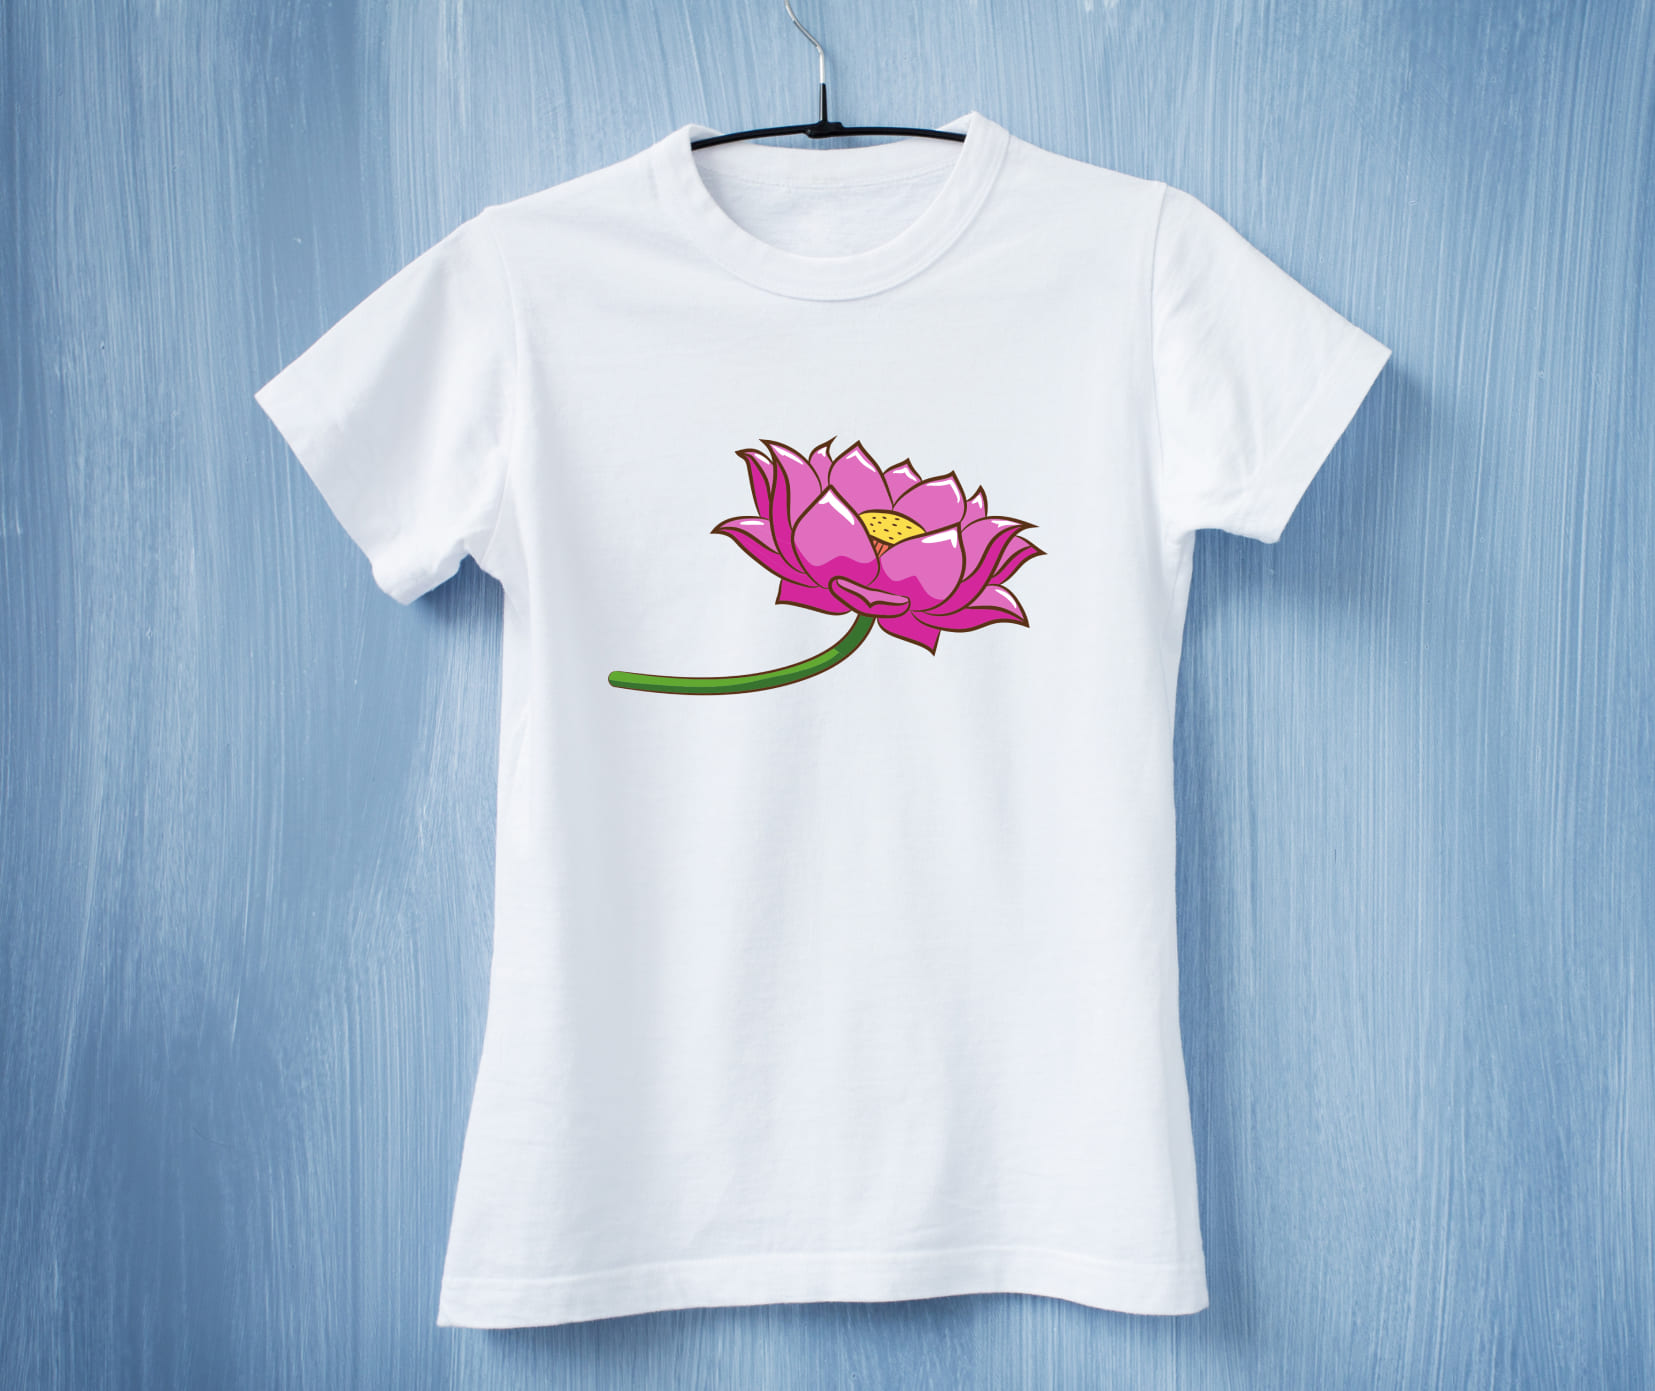 Minimalistic red lotus on a white t-shirt.